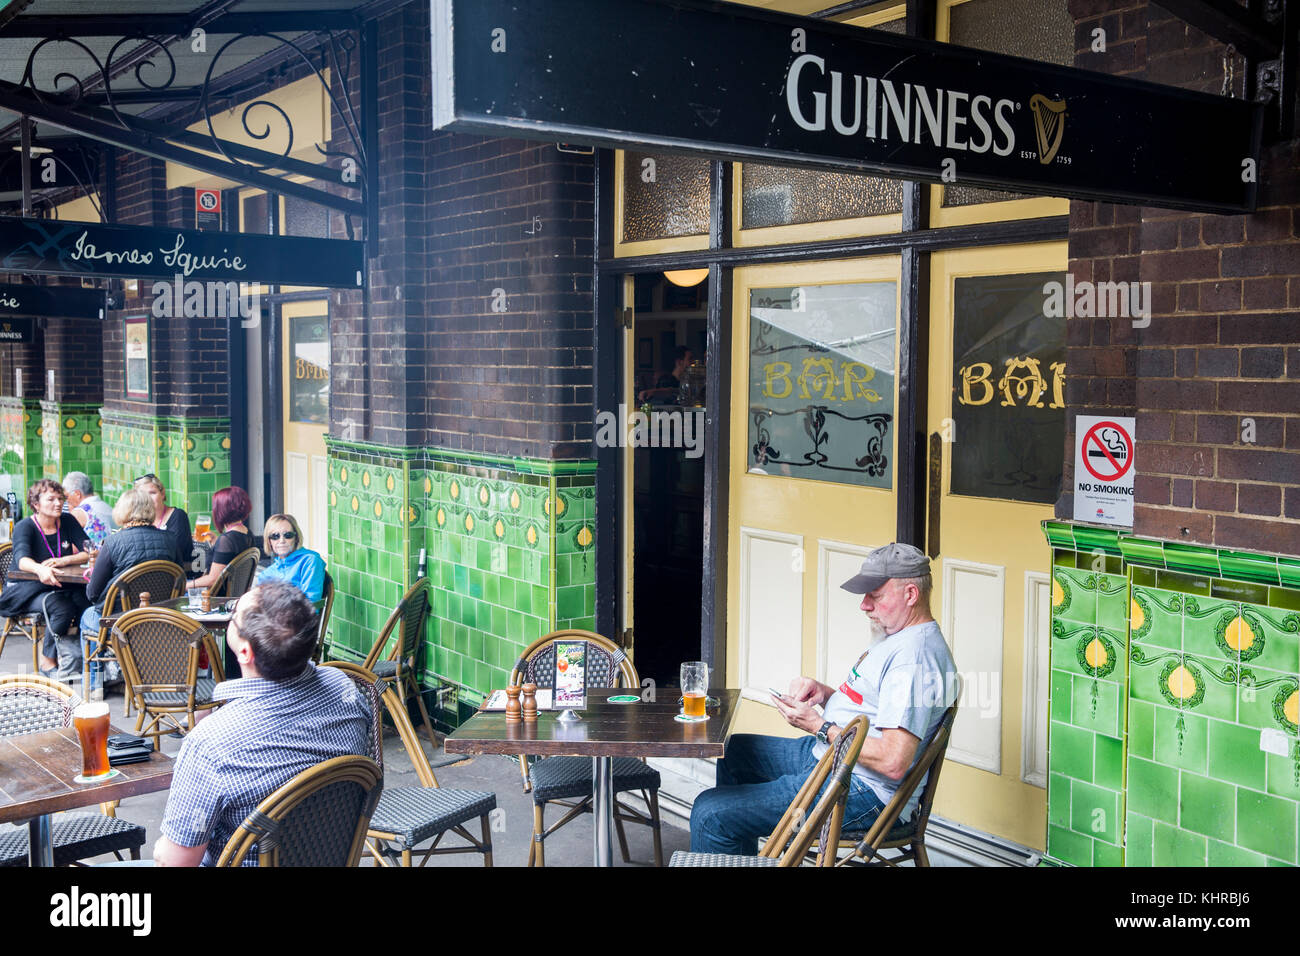 Guinness and James Squire beer signs at the Mercantile hotel pub in george street,Sydney,Australia Stock Photo